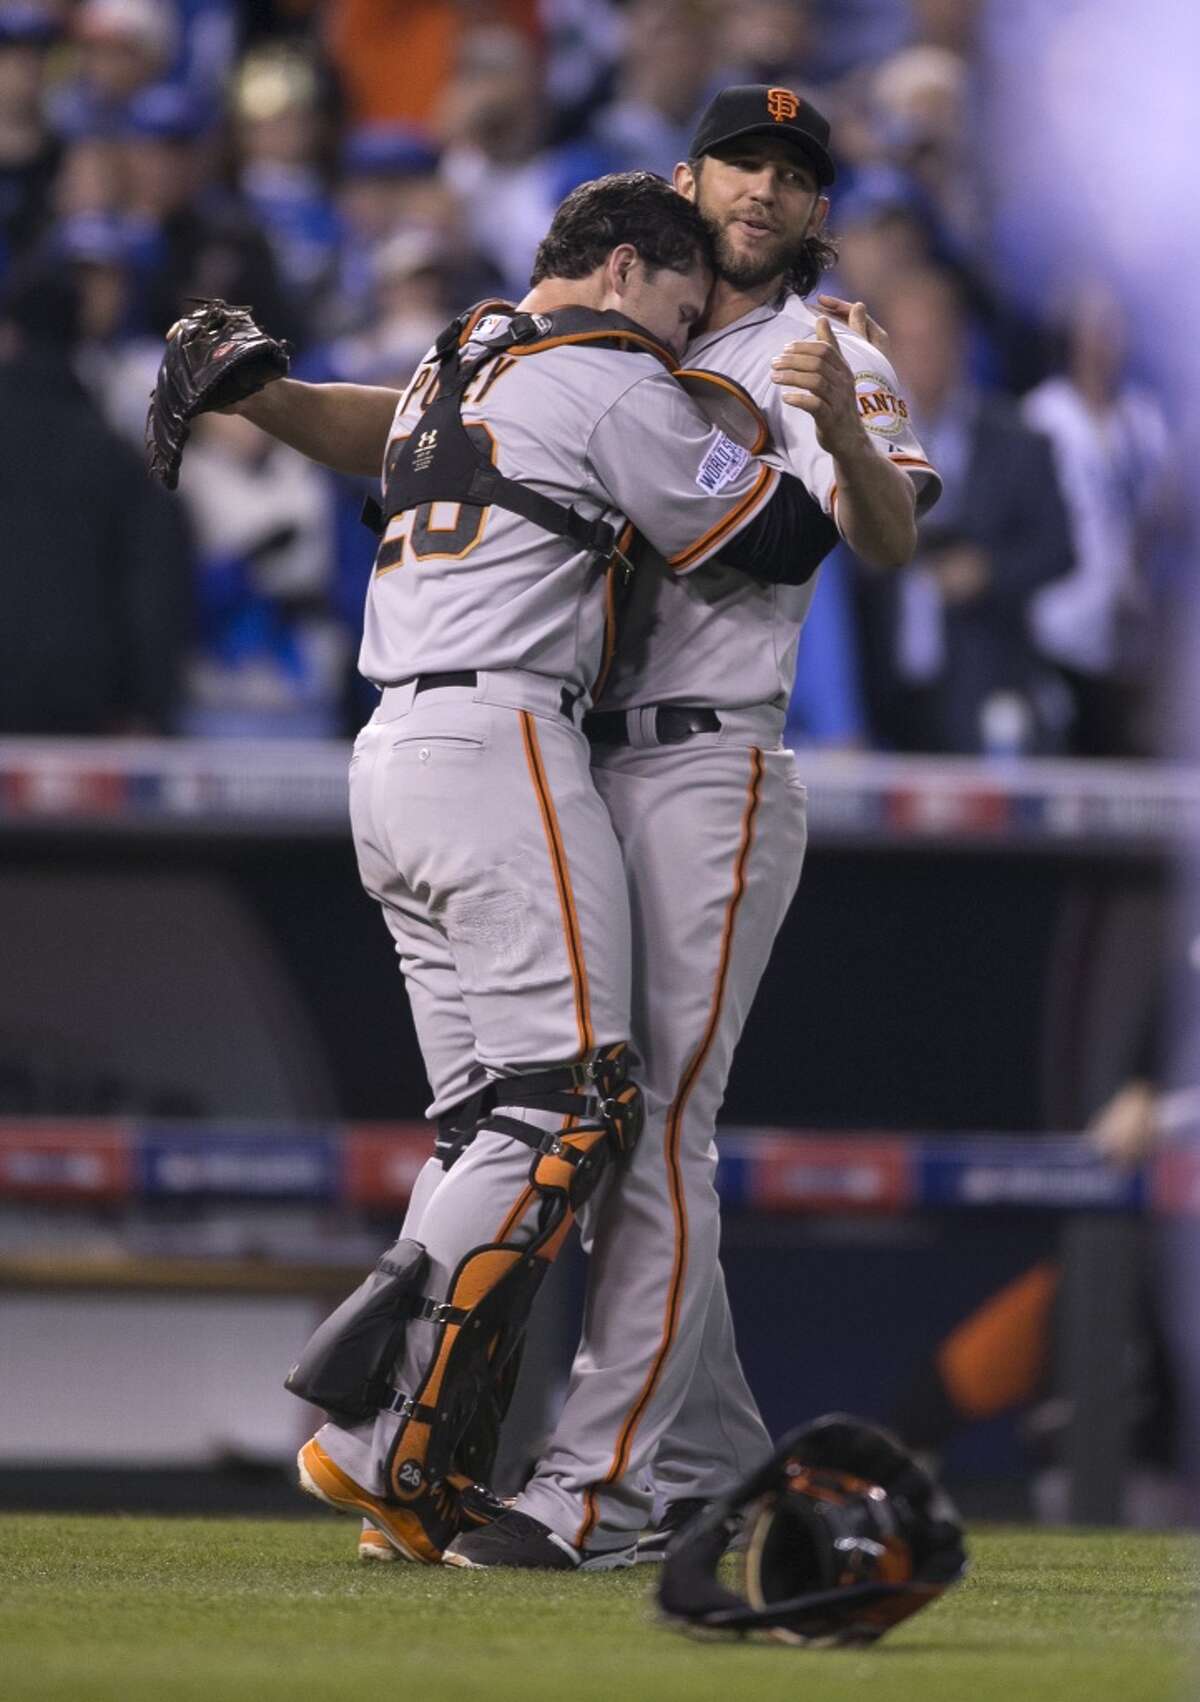 Giants Buster Posey hugs Madison Bumgarner as the Giants defeated the Royals in Game 7 of the World Series at Kauffman Stadium on Wednesday, Oct. 29, 2014 in Kansas City, Mo.